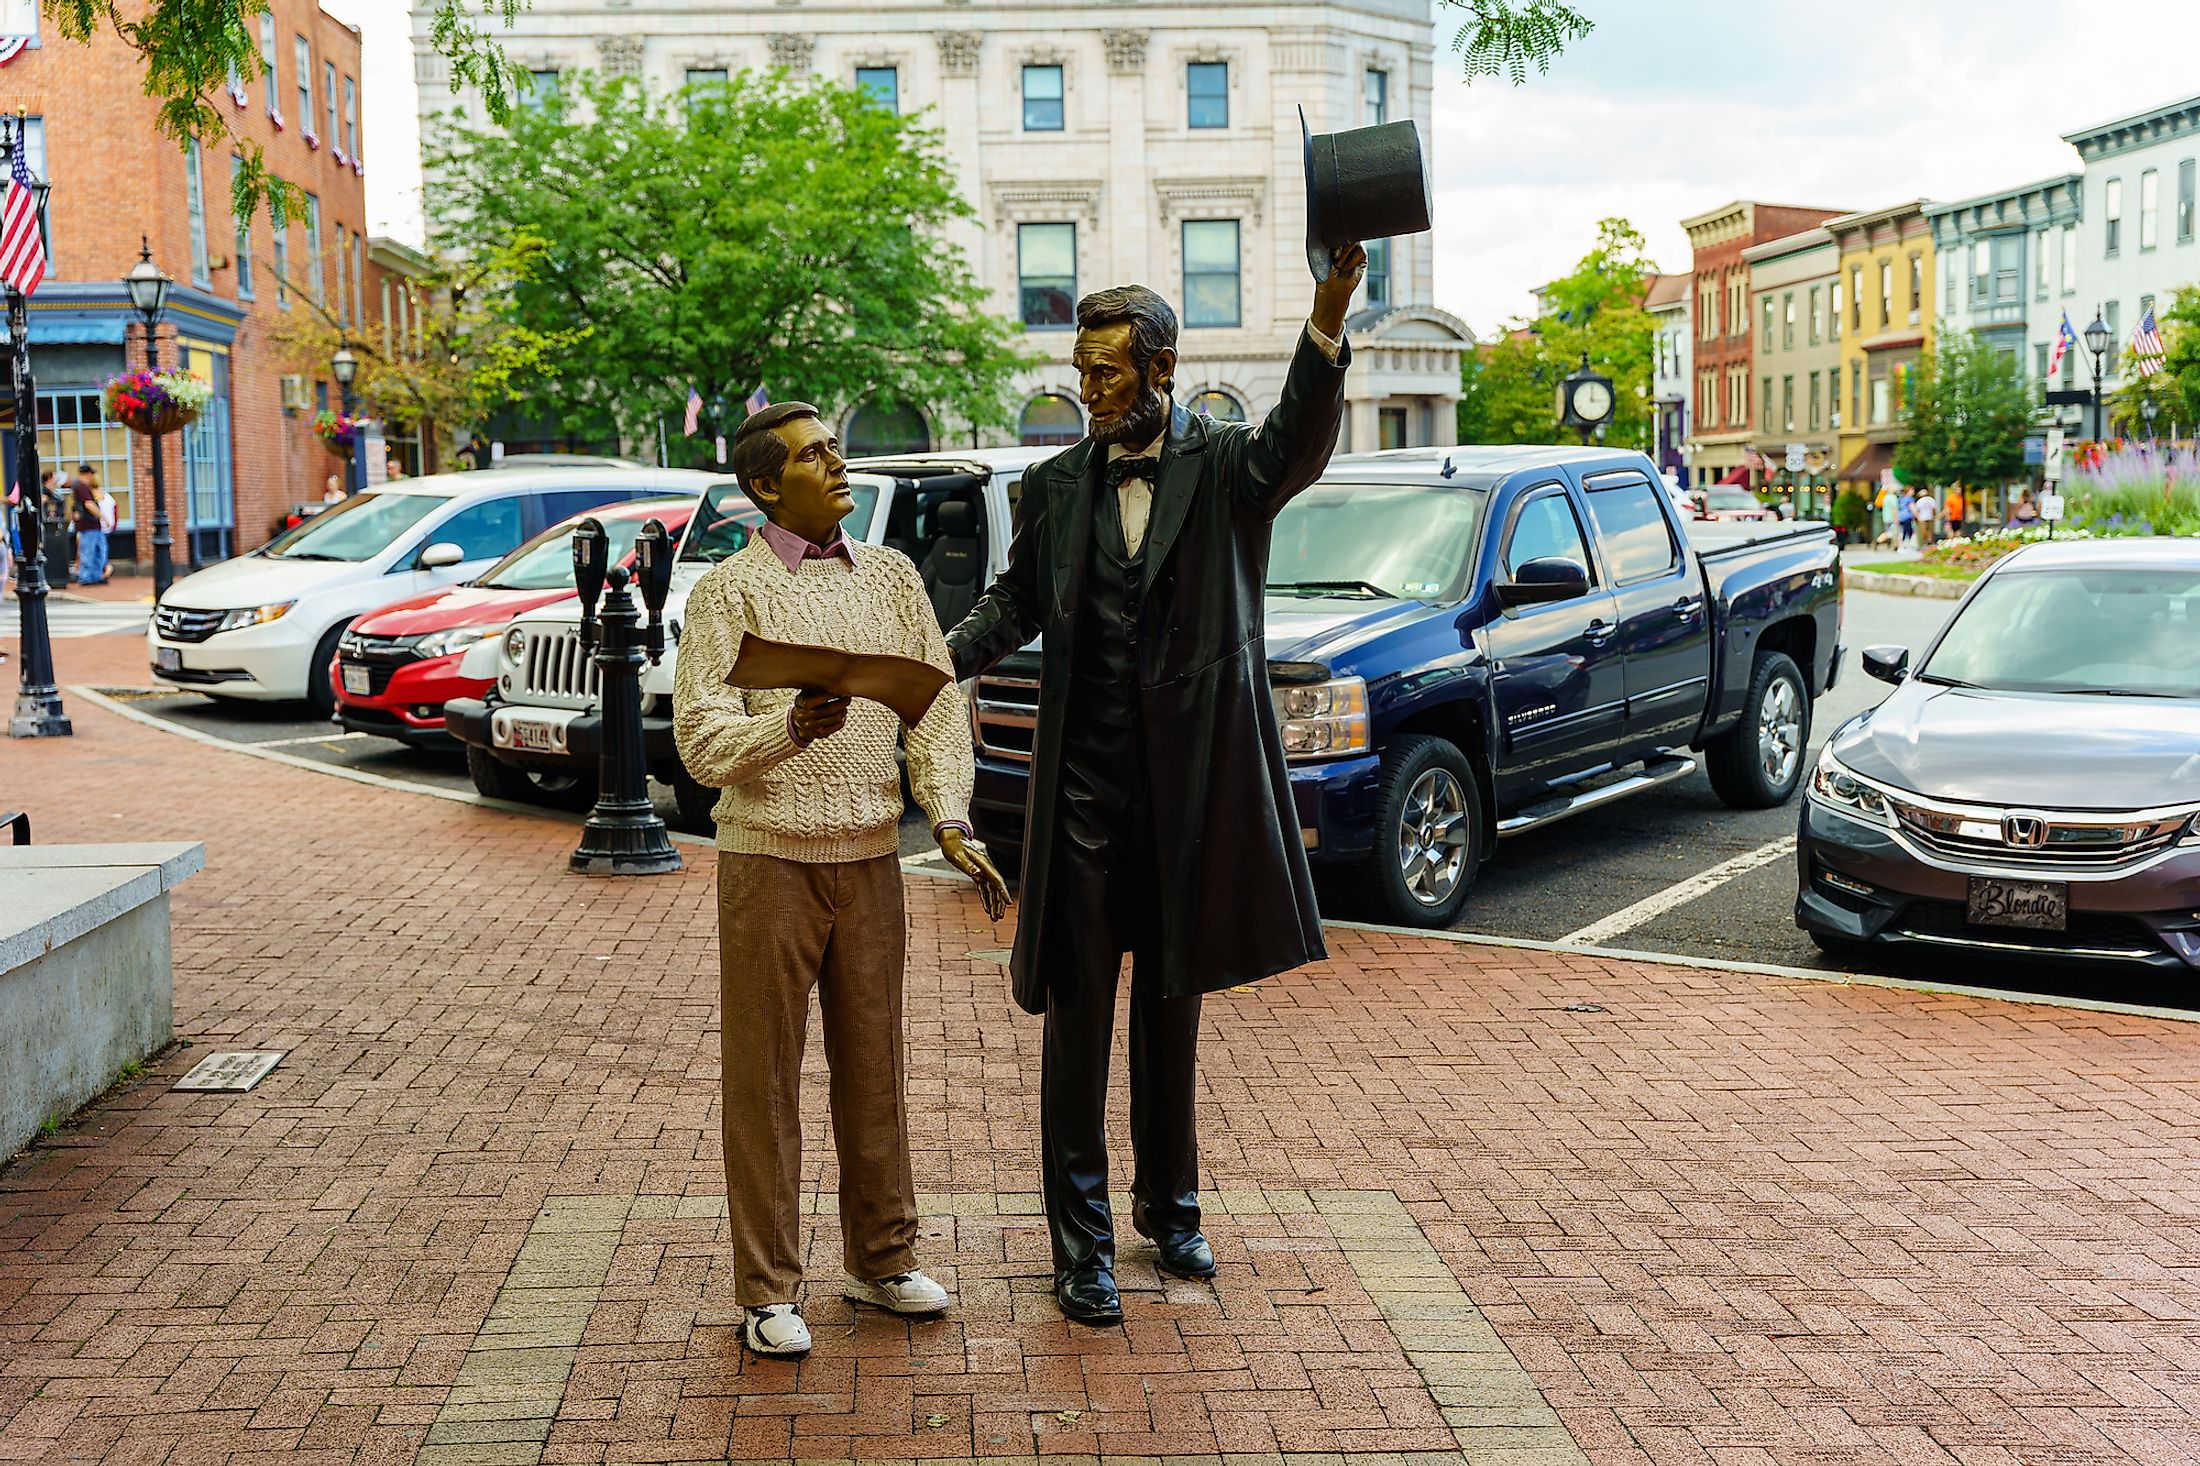 The President Lincoln Statue in the square in front of the David Wills House is a popular place for visitors to take photos in Gettysburg. Editorial credit: George Sheldon / Shutterstock.com